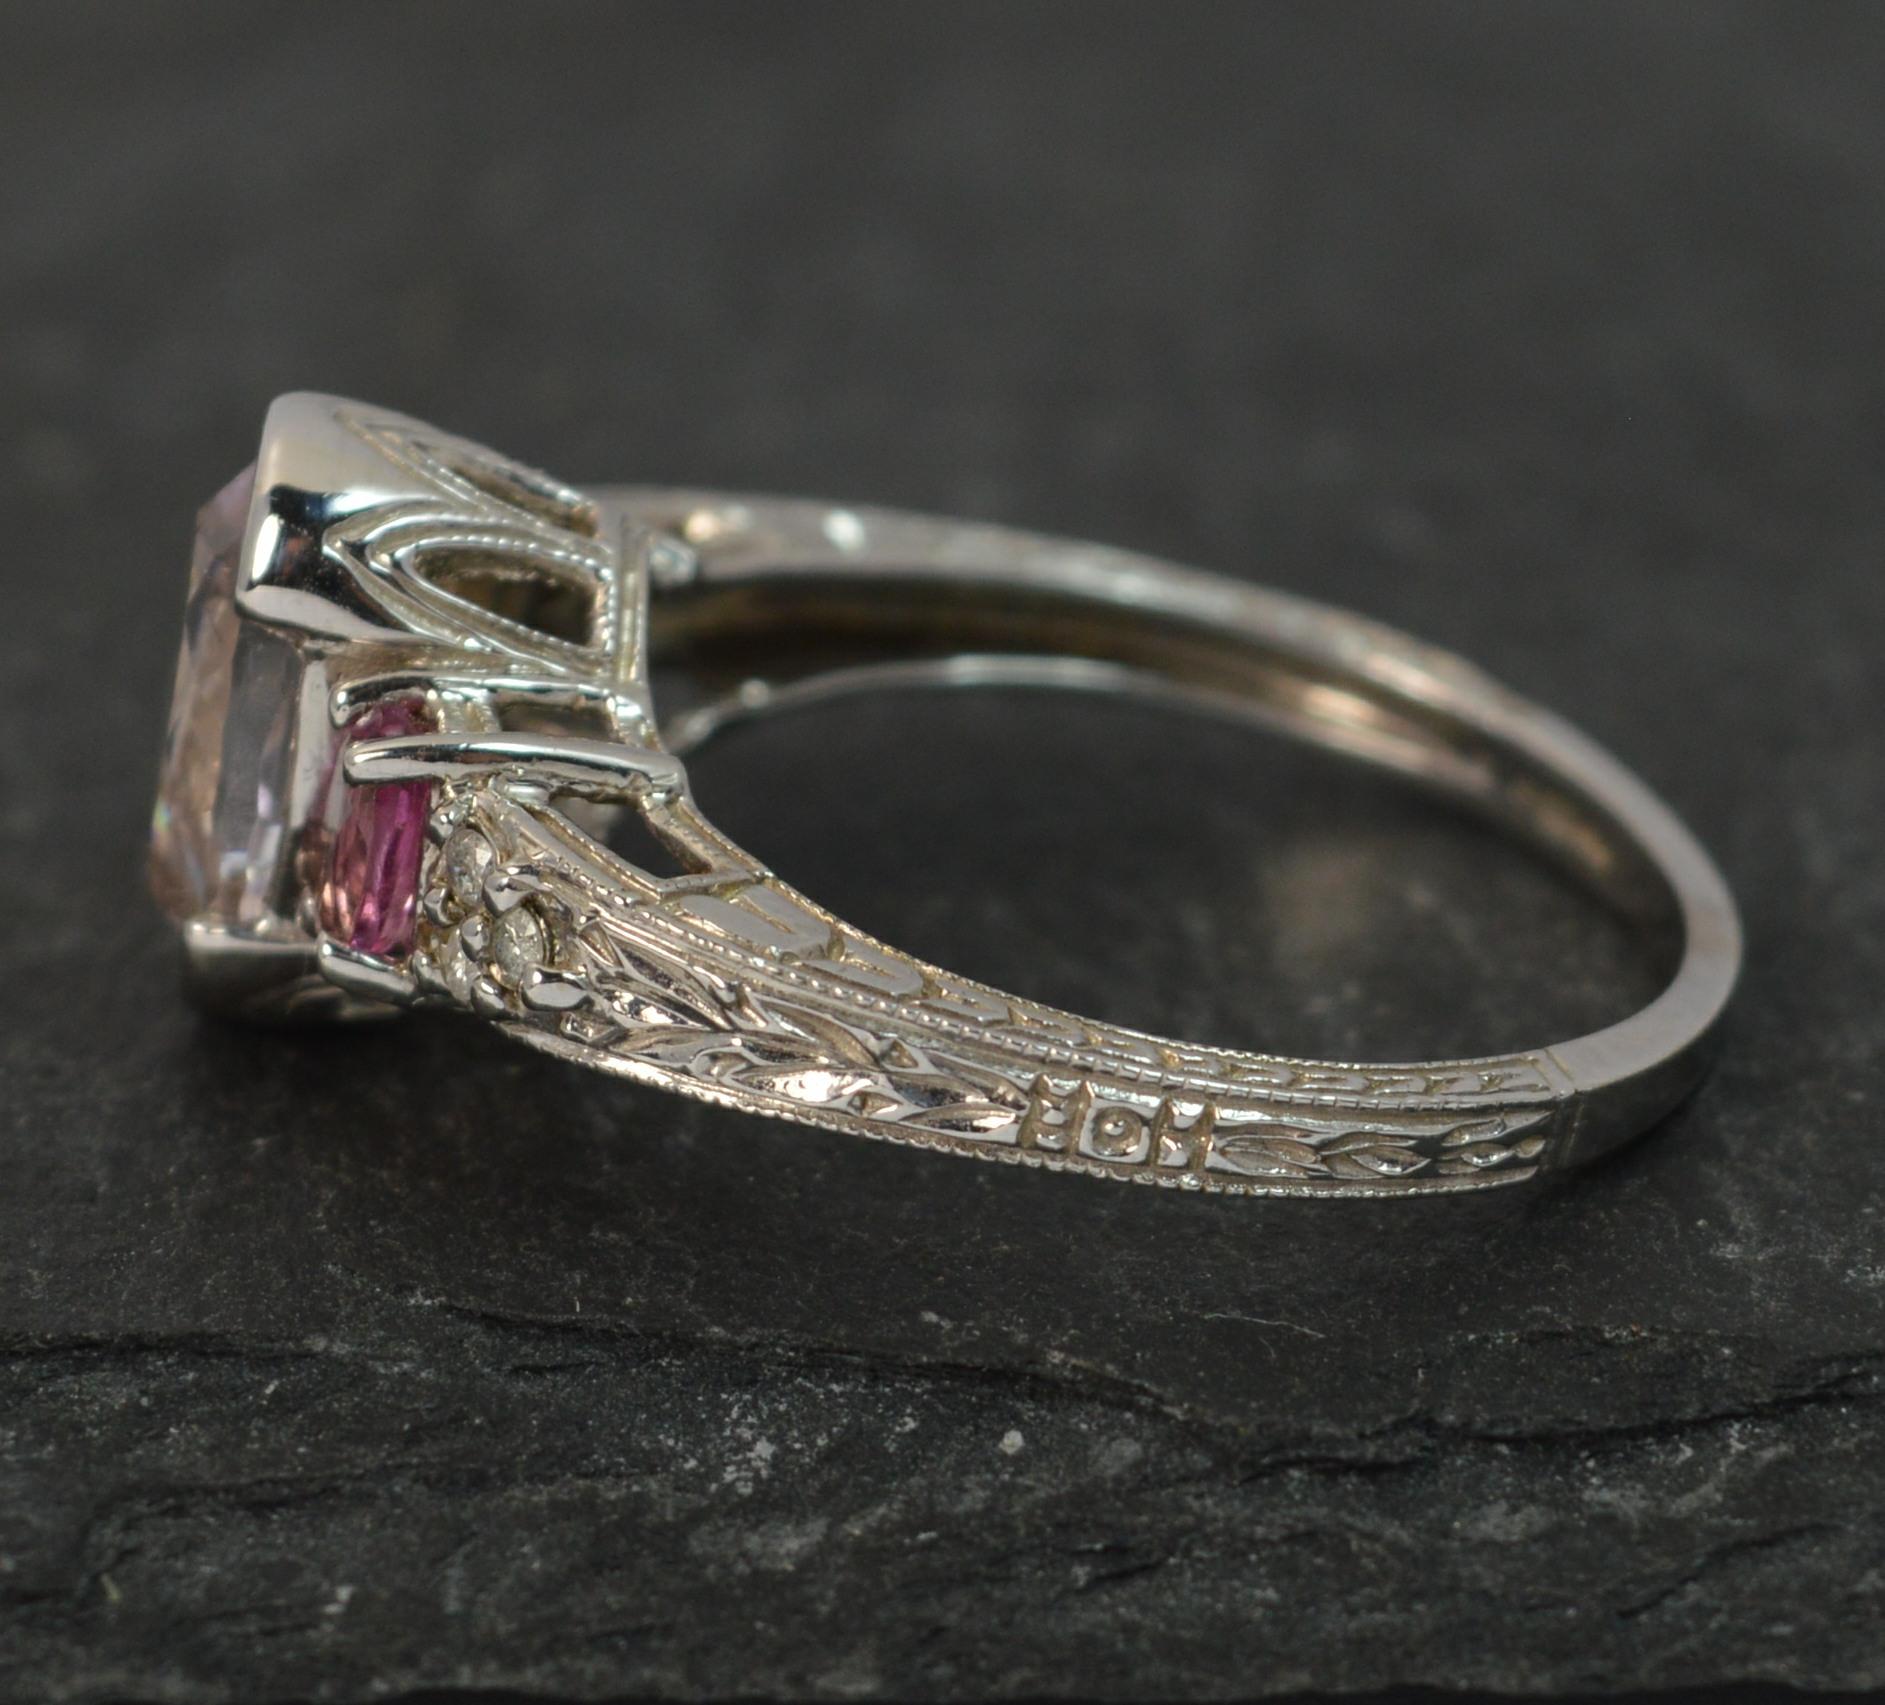 A superb 14 carat white gold, kunzite, pink tourmaline and diamond ring.
Size ; T UK, 9 1/2 US
Designed with oval cut gemstones to the centre to form a 12mm x 12mm trilogy and three small diamonds to each side.

Solid 14ct white gold example with